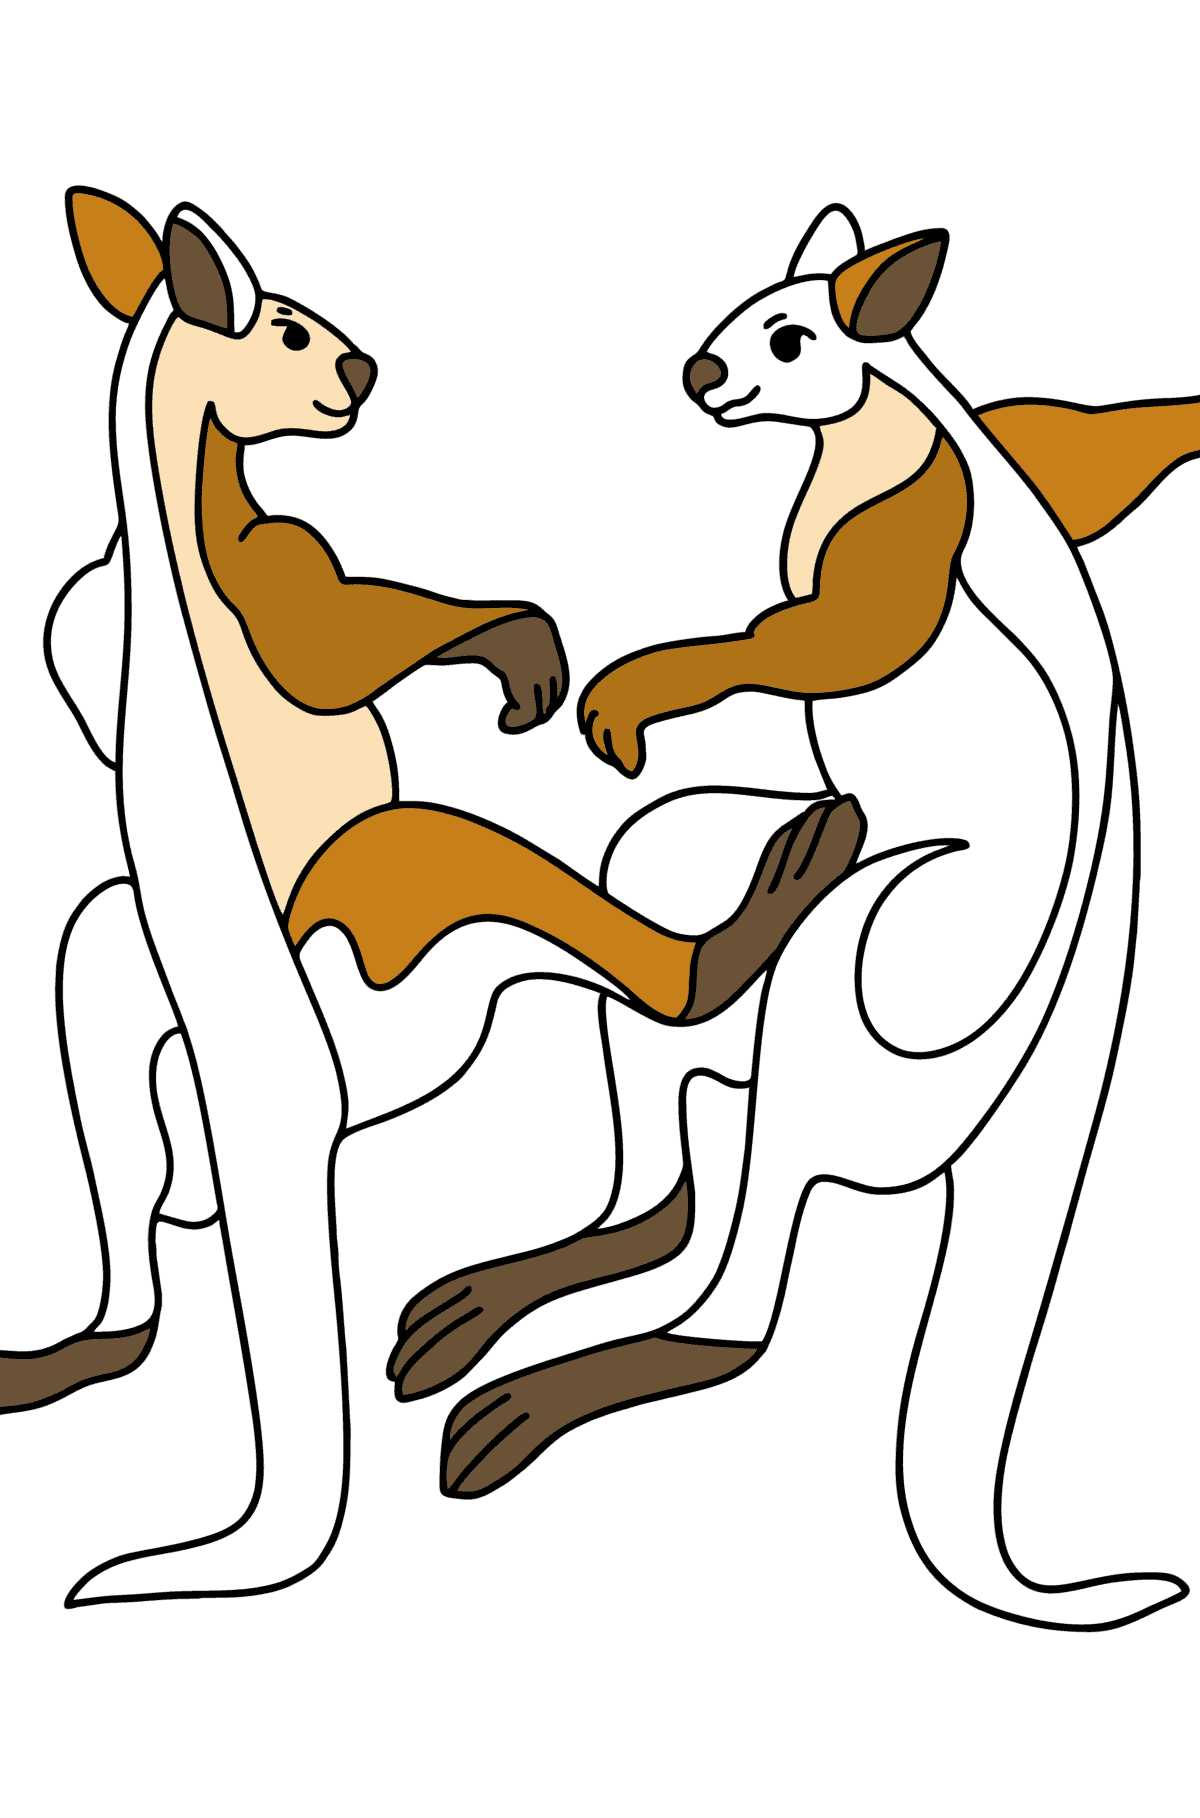 Kangaroo Wrestling coloring page - Coloring Pages for Kids